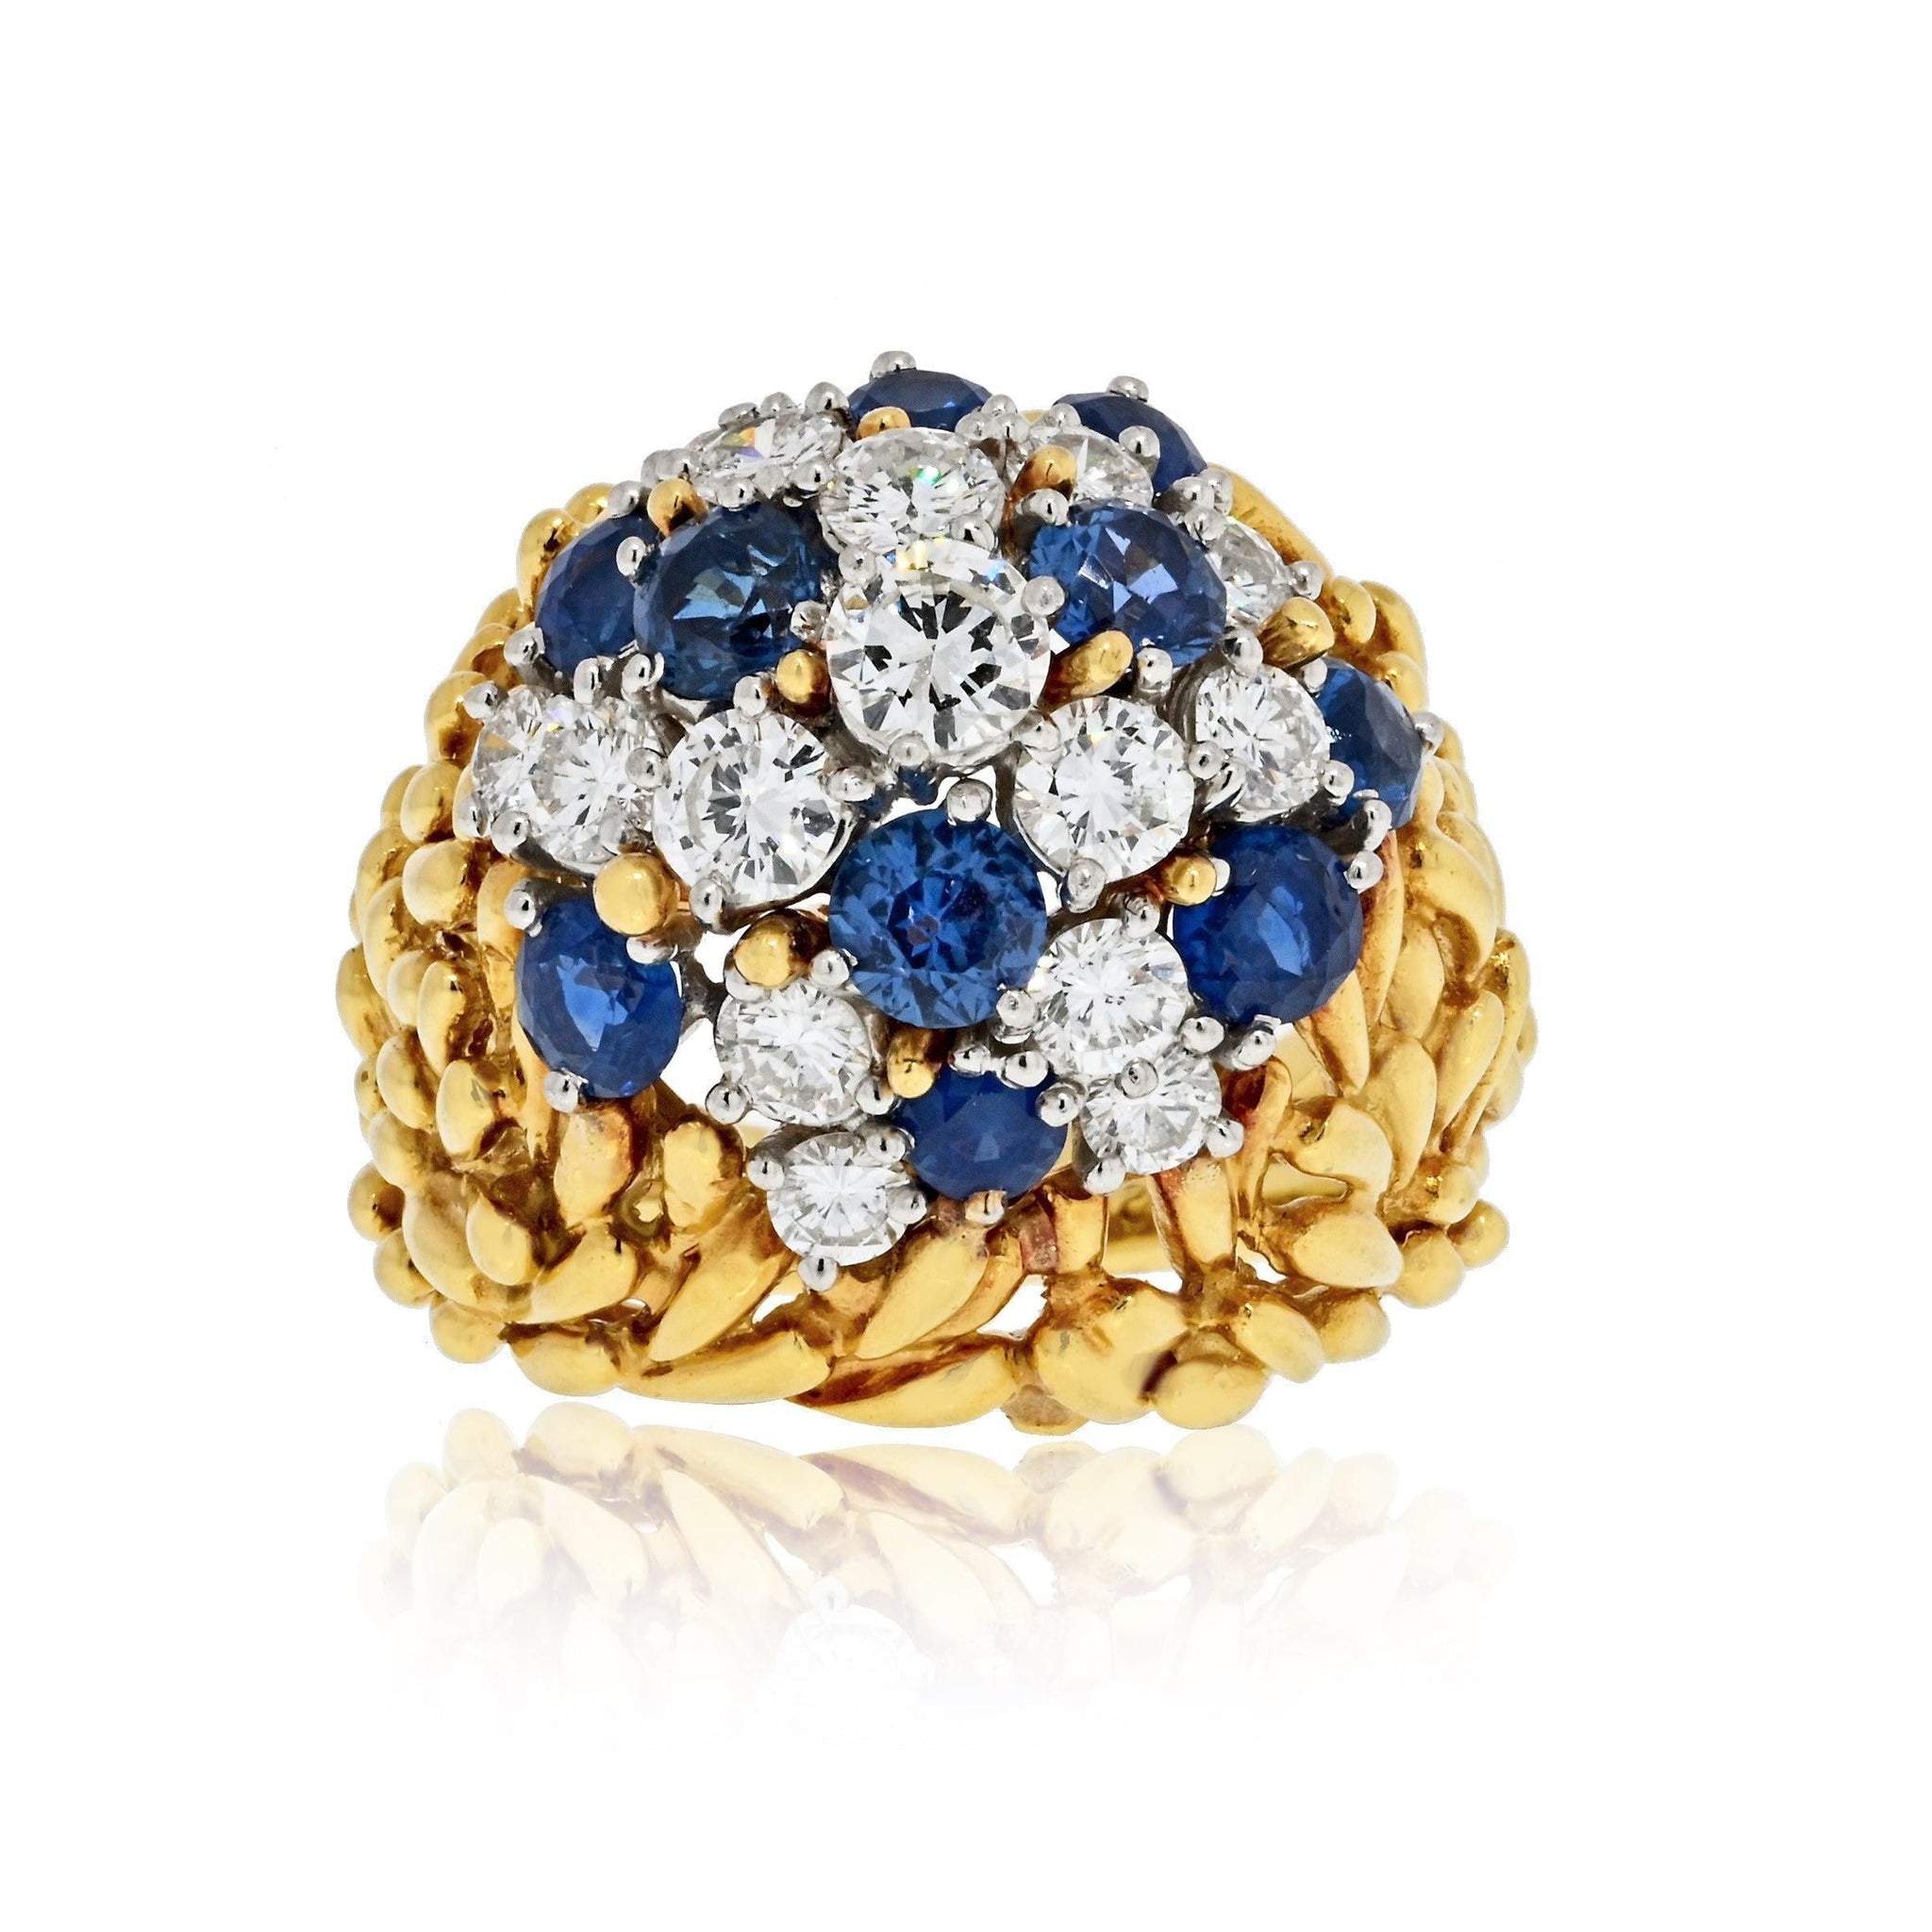 Vintage Round Cut White Diamond and Blue Sapphire Cluster Ring - ASSAY